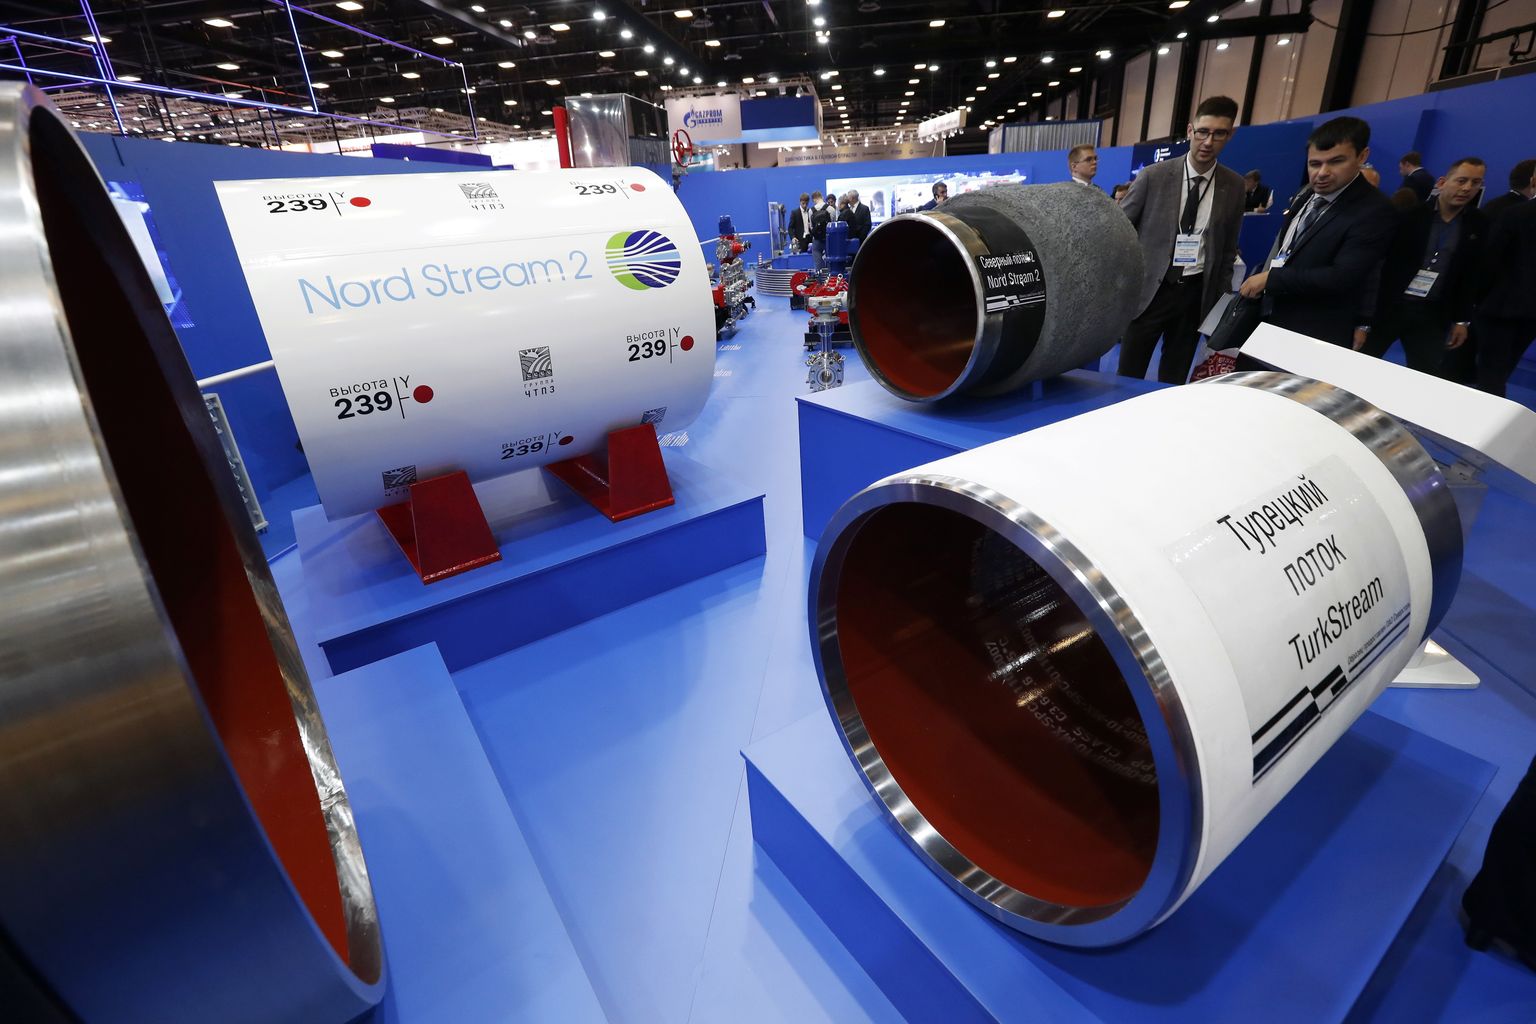 Electrically welded pipes used for Nord Stream 2 and Turkish Stream projects are on display at the international exhibition 'InGas Stream 2018 - Innovations in the Gas Industry' which is specialised for gas industry products and technologies at the 8th St. Petersburg International Gas Forum in St.Petersburg, Russia, 02 October 2018.  EPA/ANATOLY MALTSEV